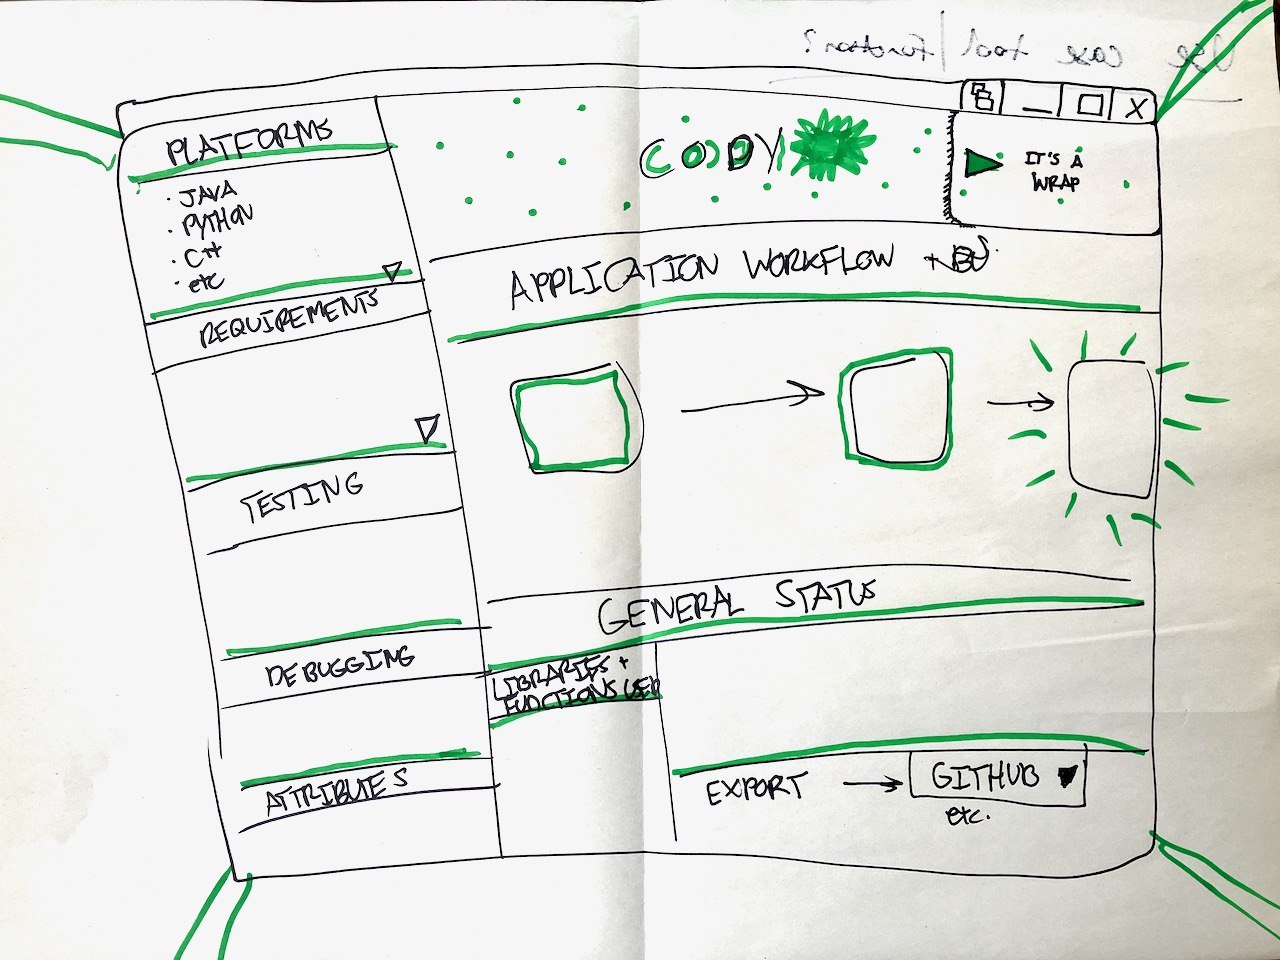 Interface mockup drawn on chart paper with marker. This tool is labeled "CODY" 